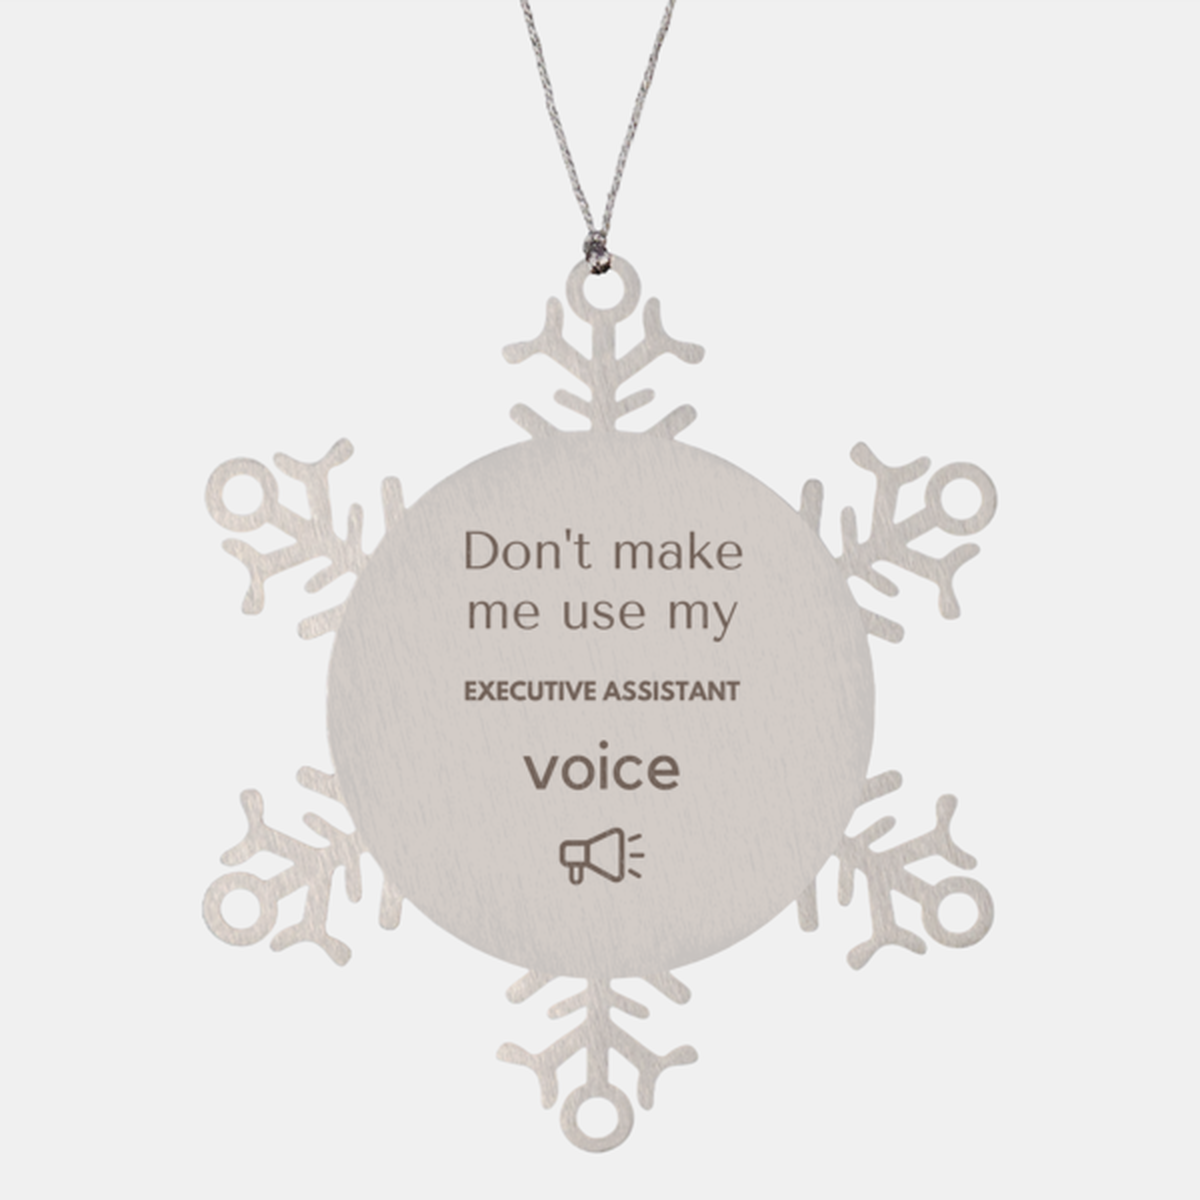 Don't make me use my Executive Assistant voice, Sarcasm Executive Assistant Ornament Gifts, Christmas Executive Assistant Snowflake Ornament Unique Gifts For Executive Assistant Coworkers, Men, Women, Colleague, Friends